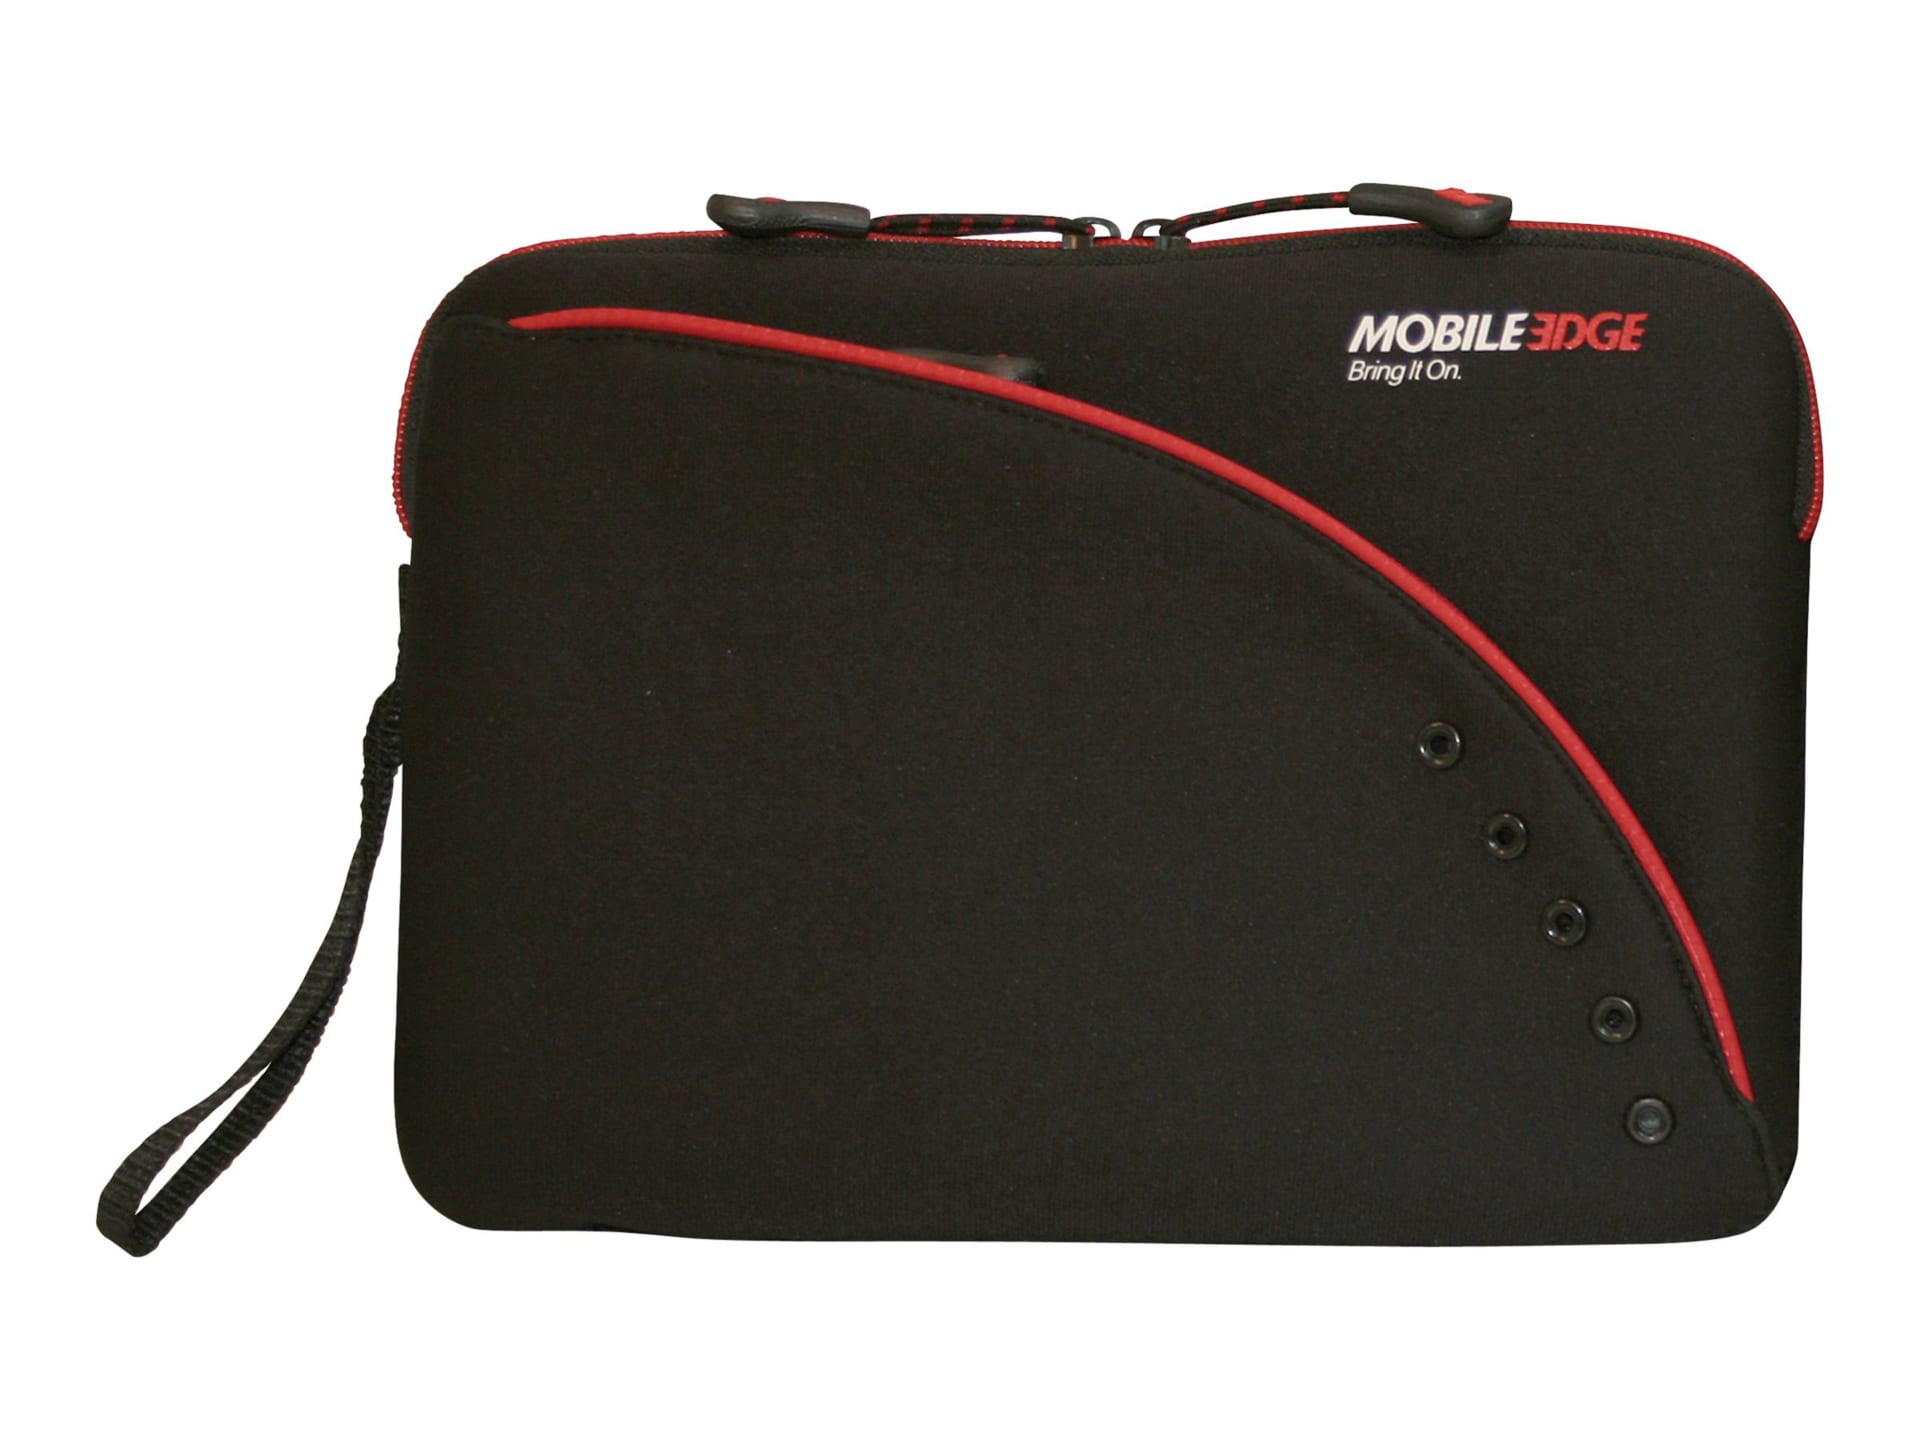 Mobile Edge 7" to 8.9" Tablet Neoprene Sleeve - protective sleeve for tablet / netbook